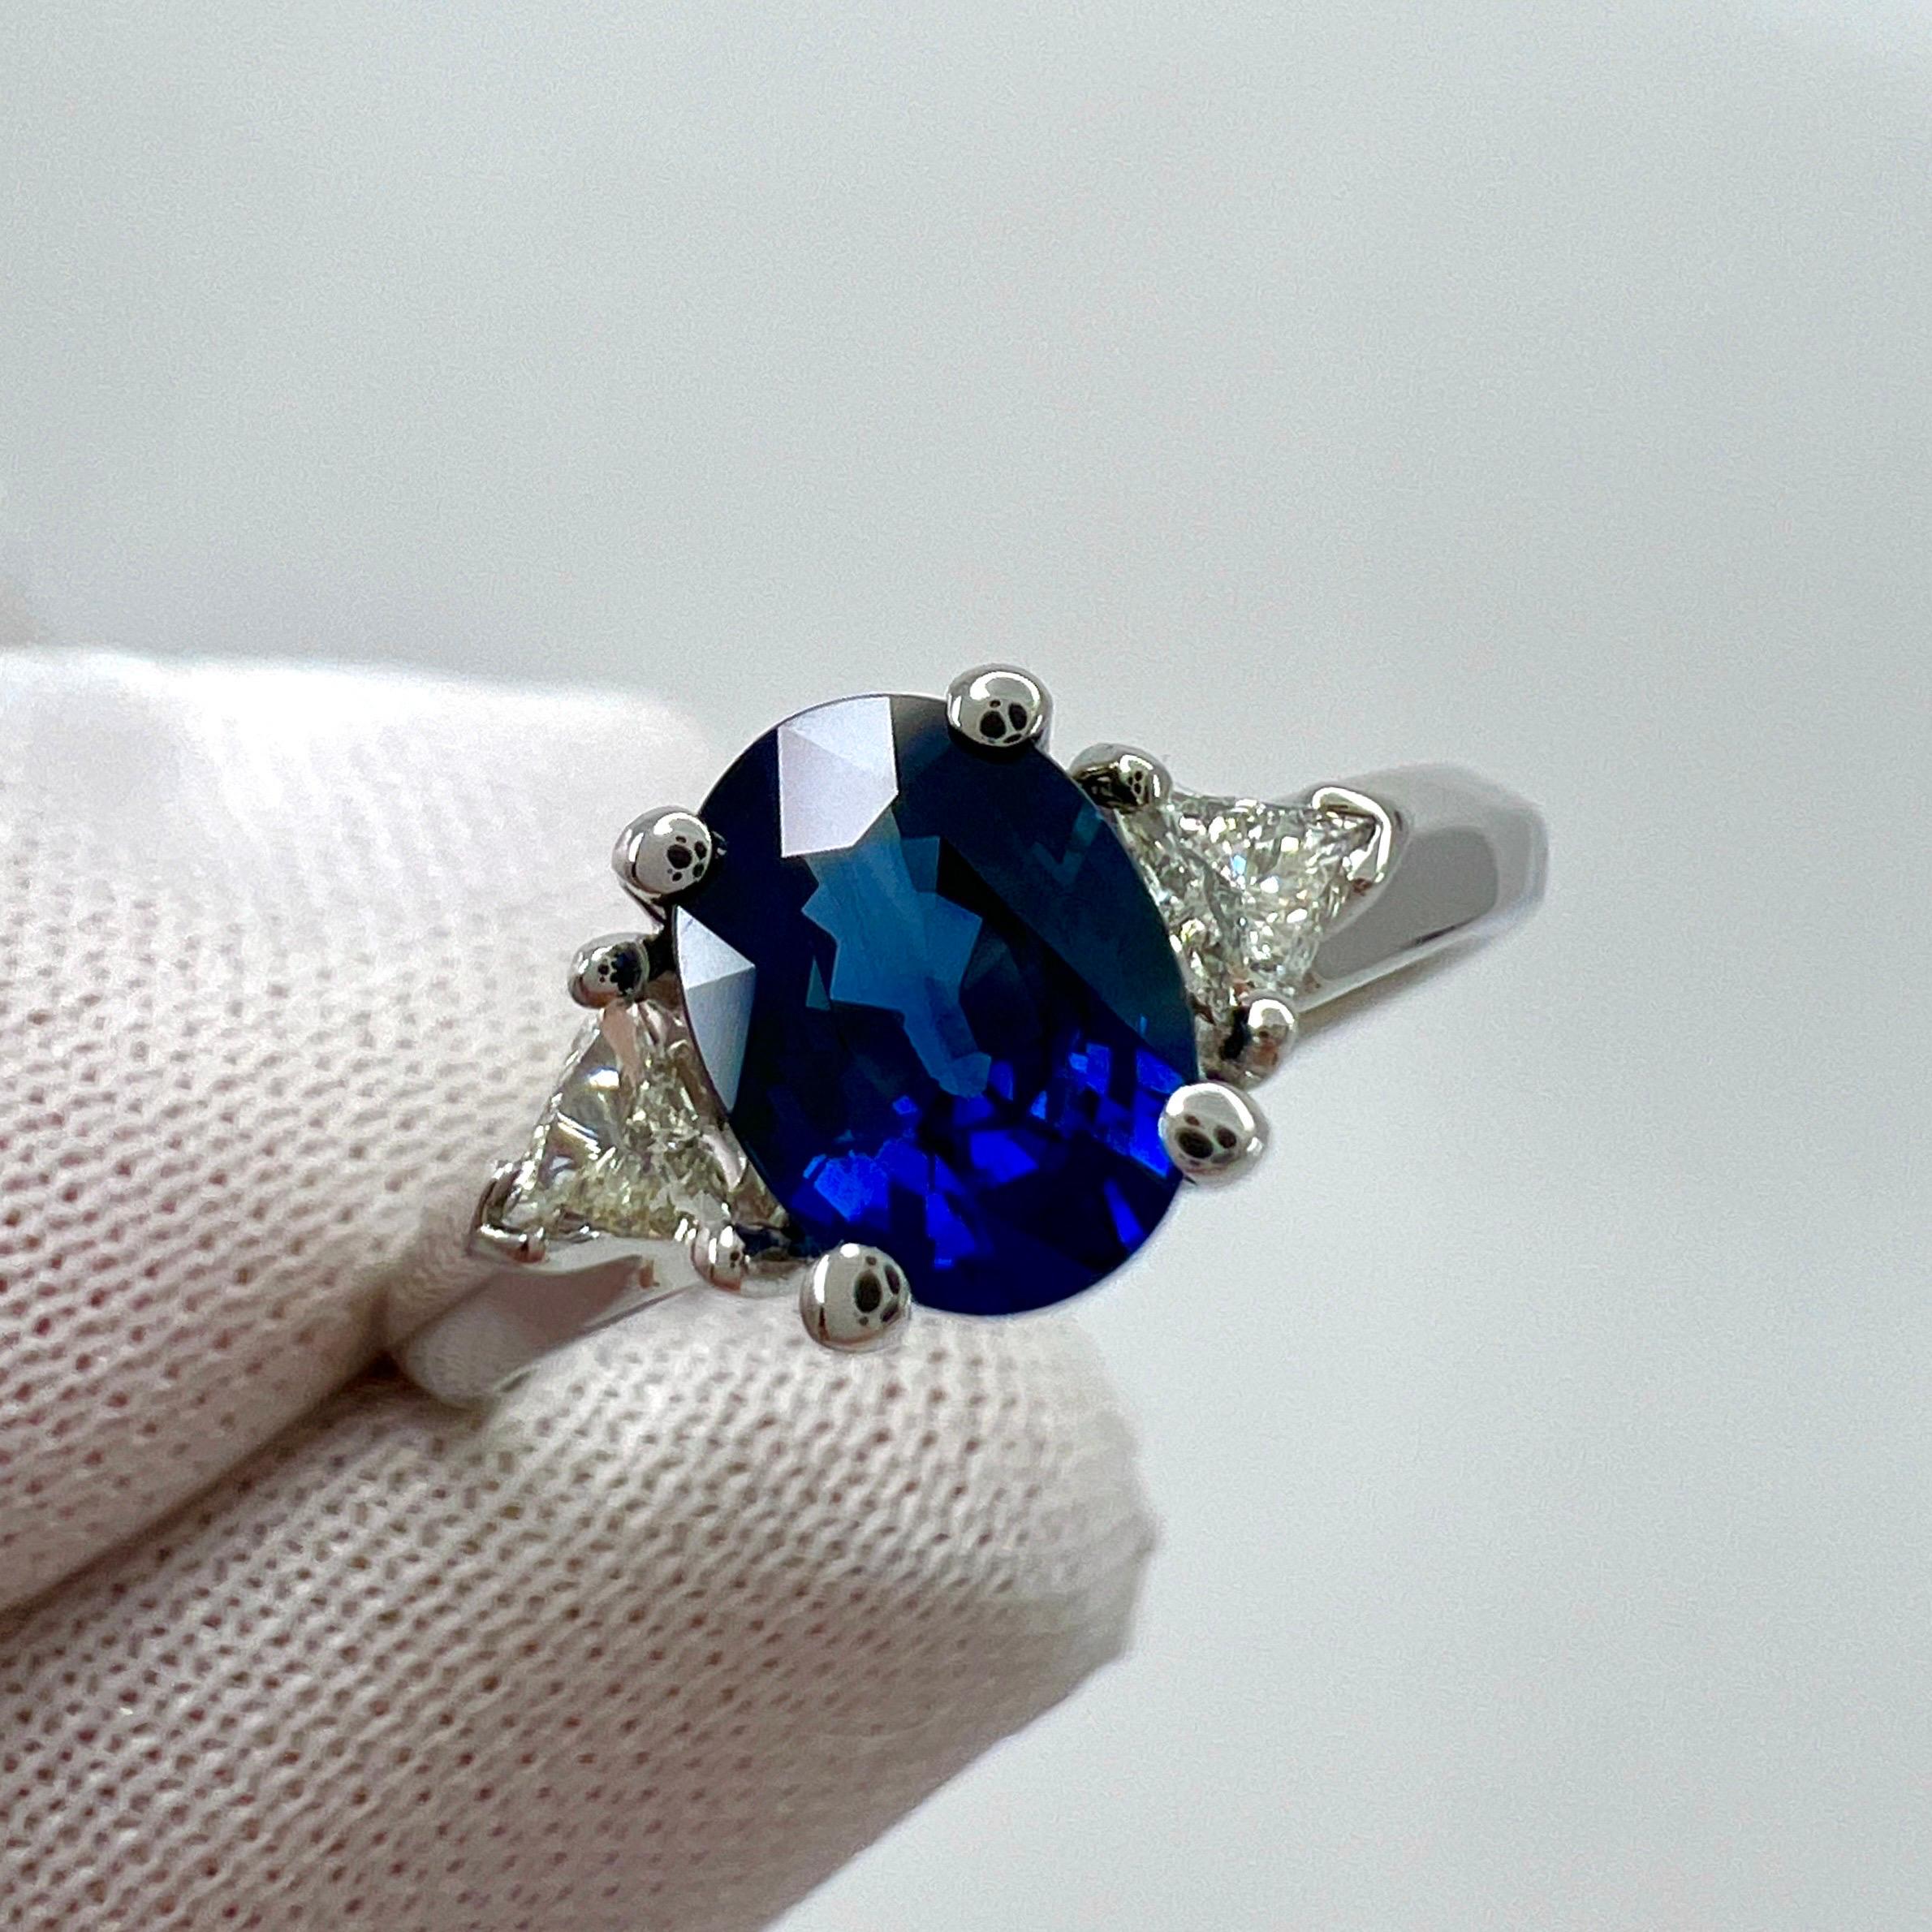 Fine Oval Cut Royal Blue Sapphire And Diamond 18k White Gold Three Stone Ring.

Fine 1.03 carat natural sapphire with a beautiful deep royal blue colour, top grade colour sapphire.
This sapphire also has an excellent oval cut and excellent clarity.